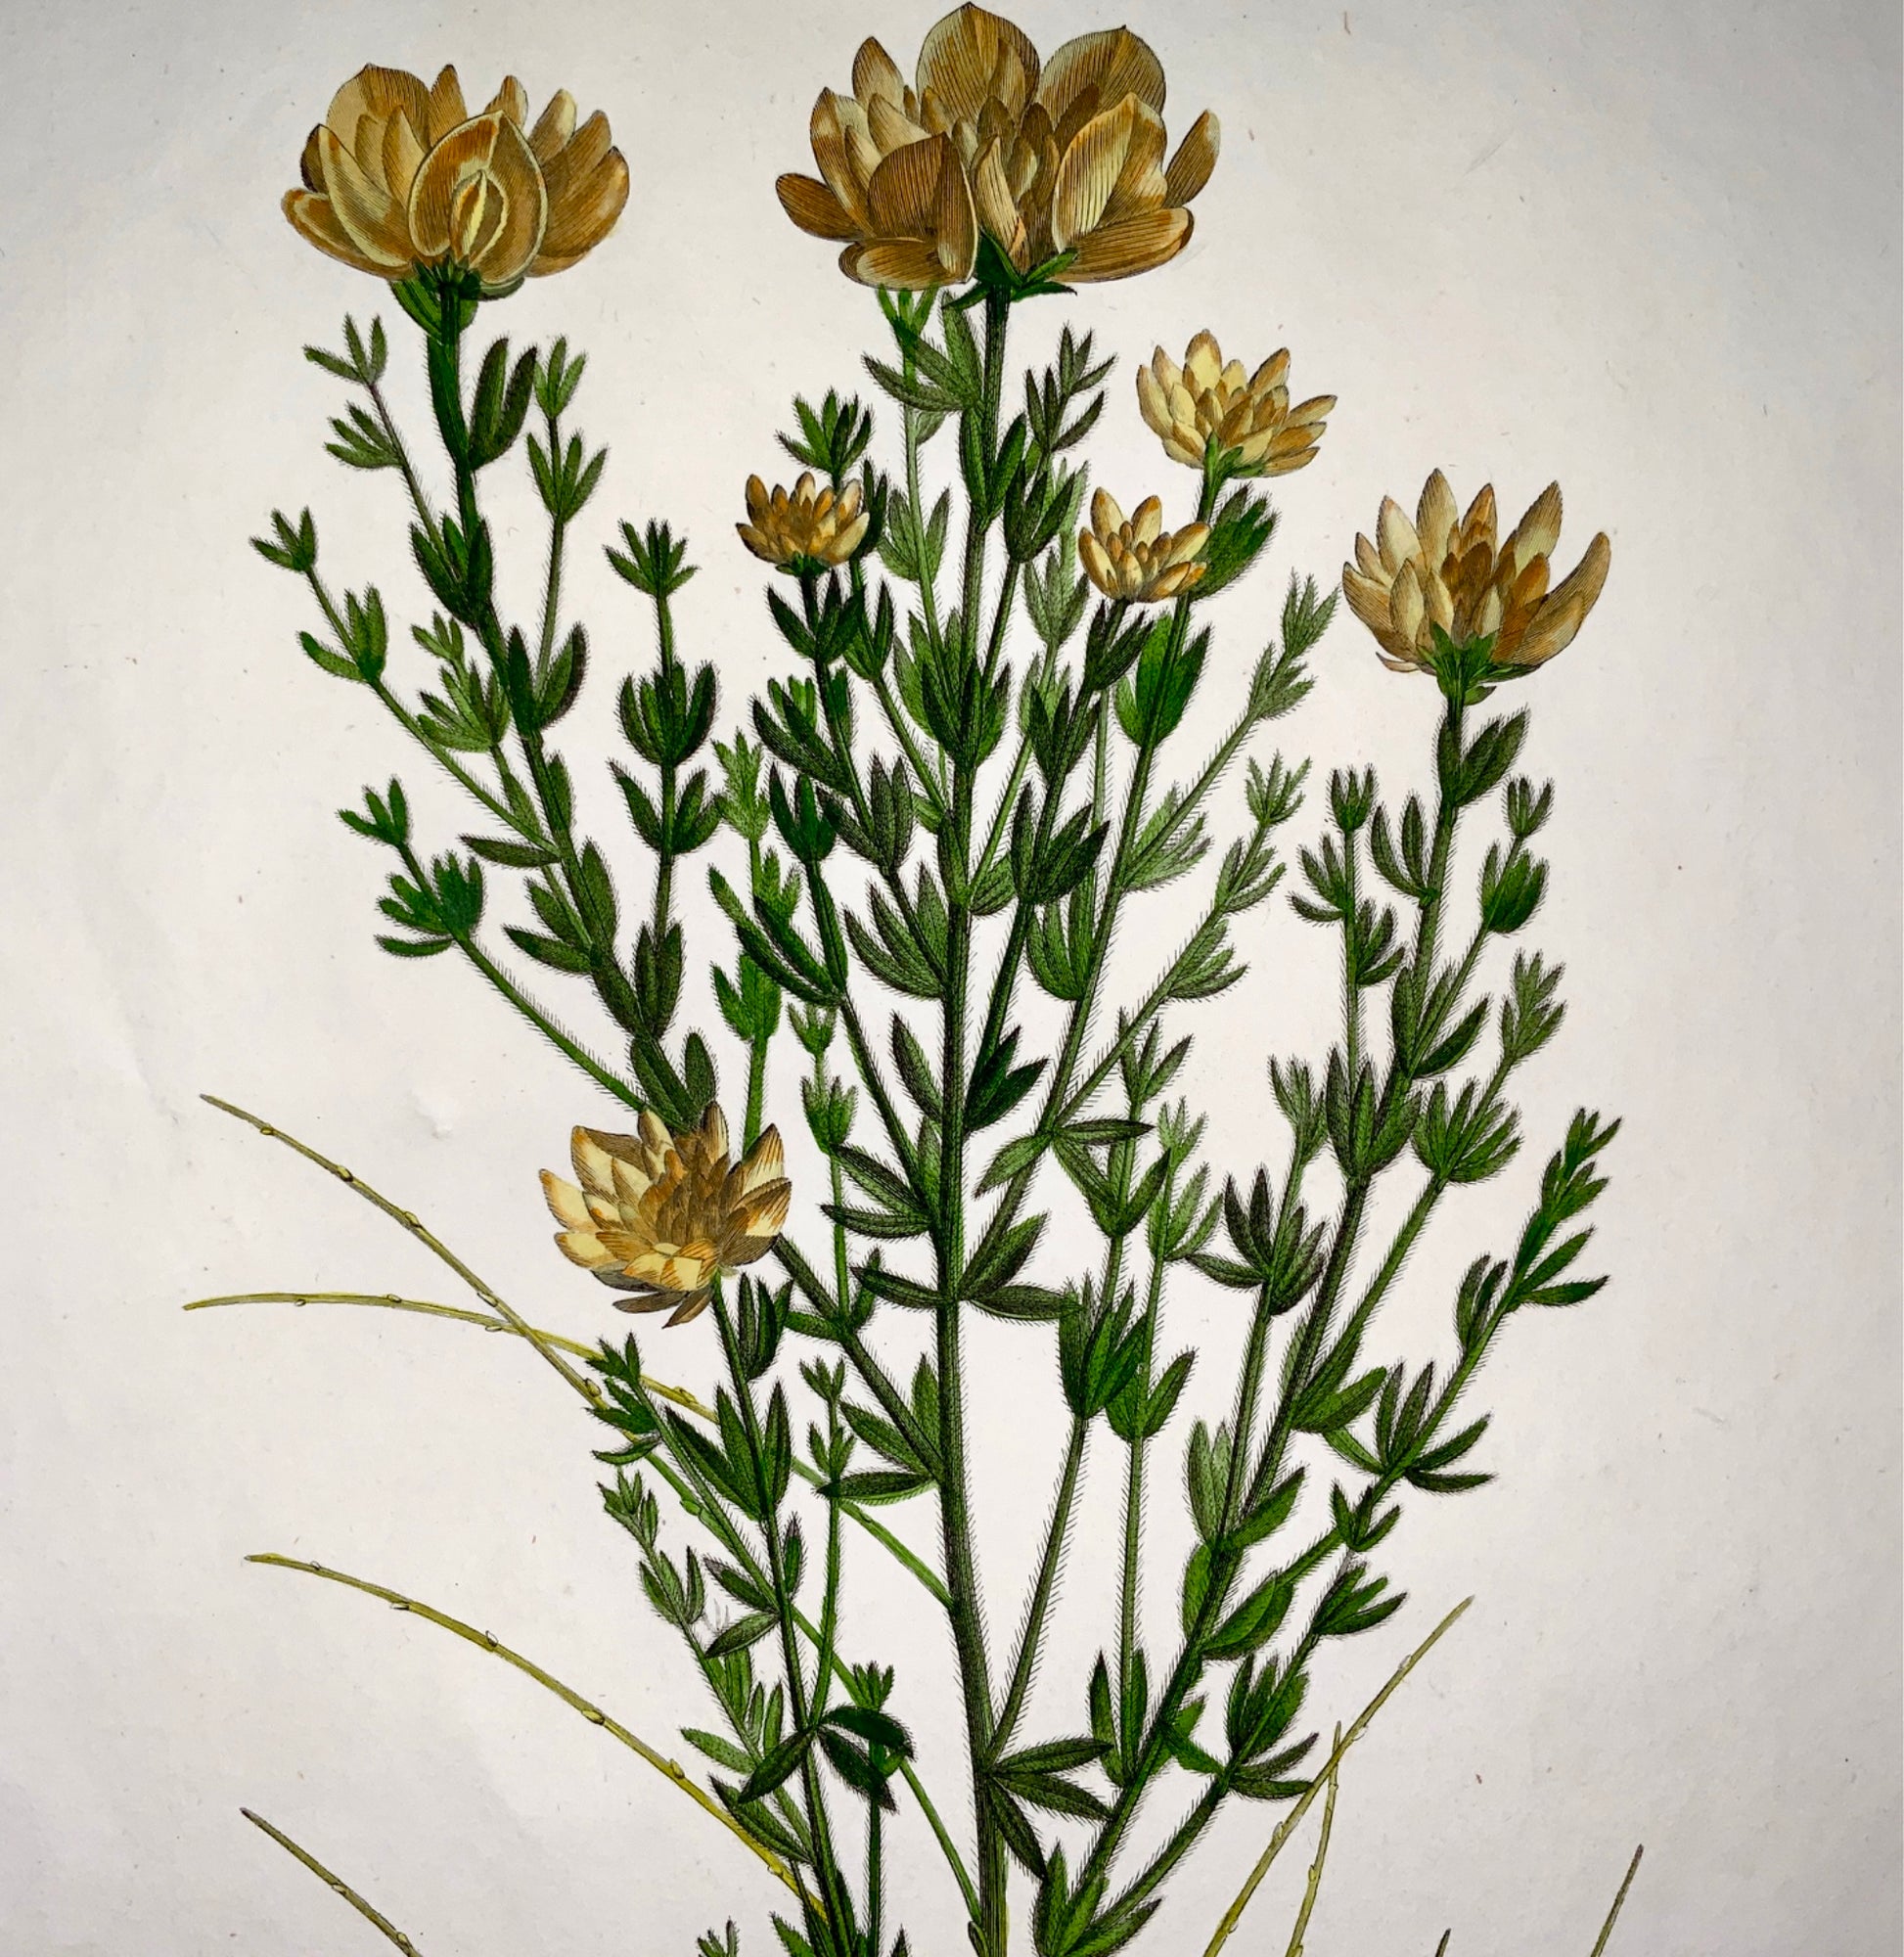 1803 Sellier after Bessa and Redoute - Spartium -  51 x 34 cm. Hand coloured - Botany